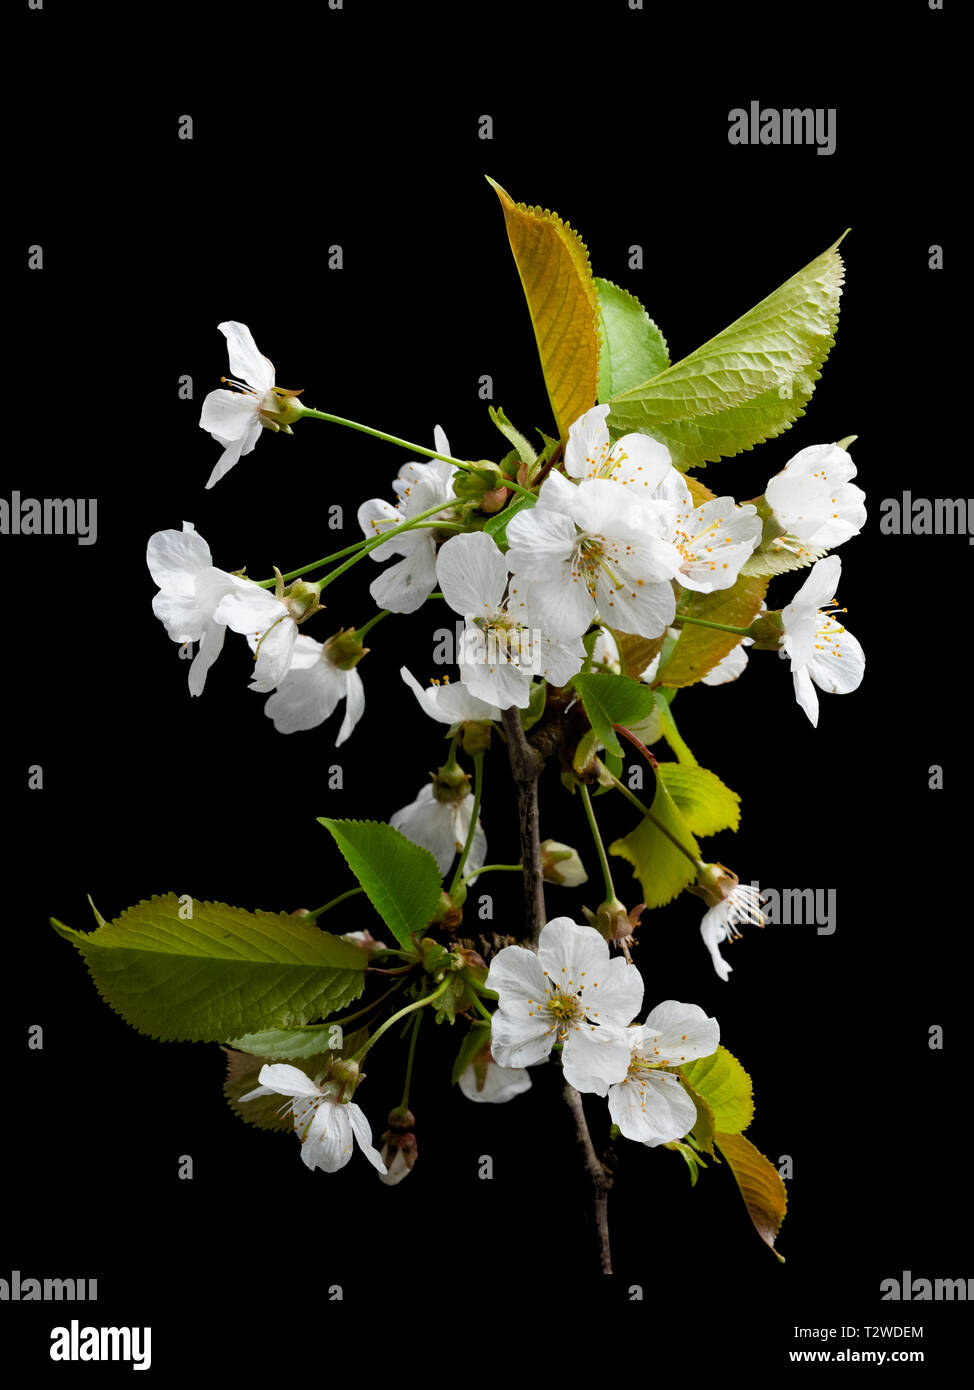 White single flowers of the wild cherry tree, Prunus avium, in early spring bloom against a black background Stock Photo